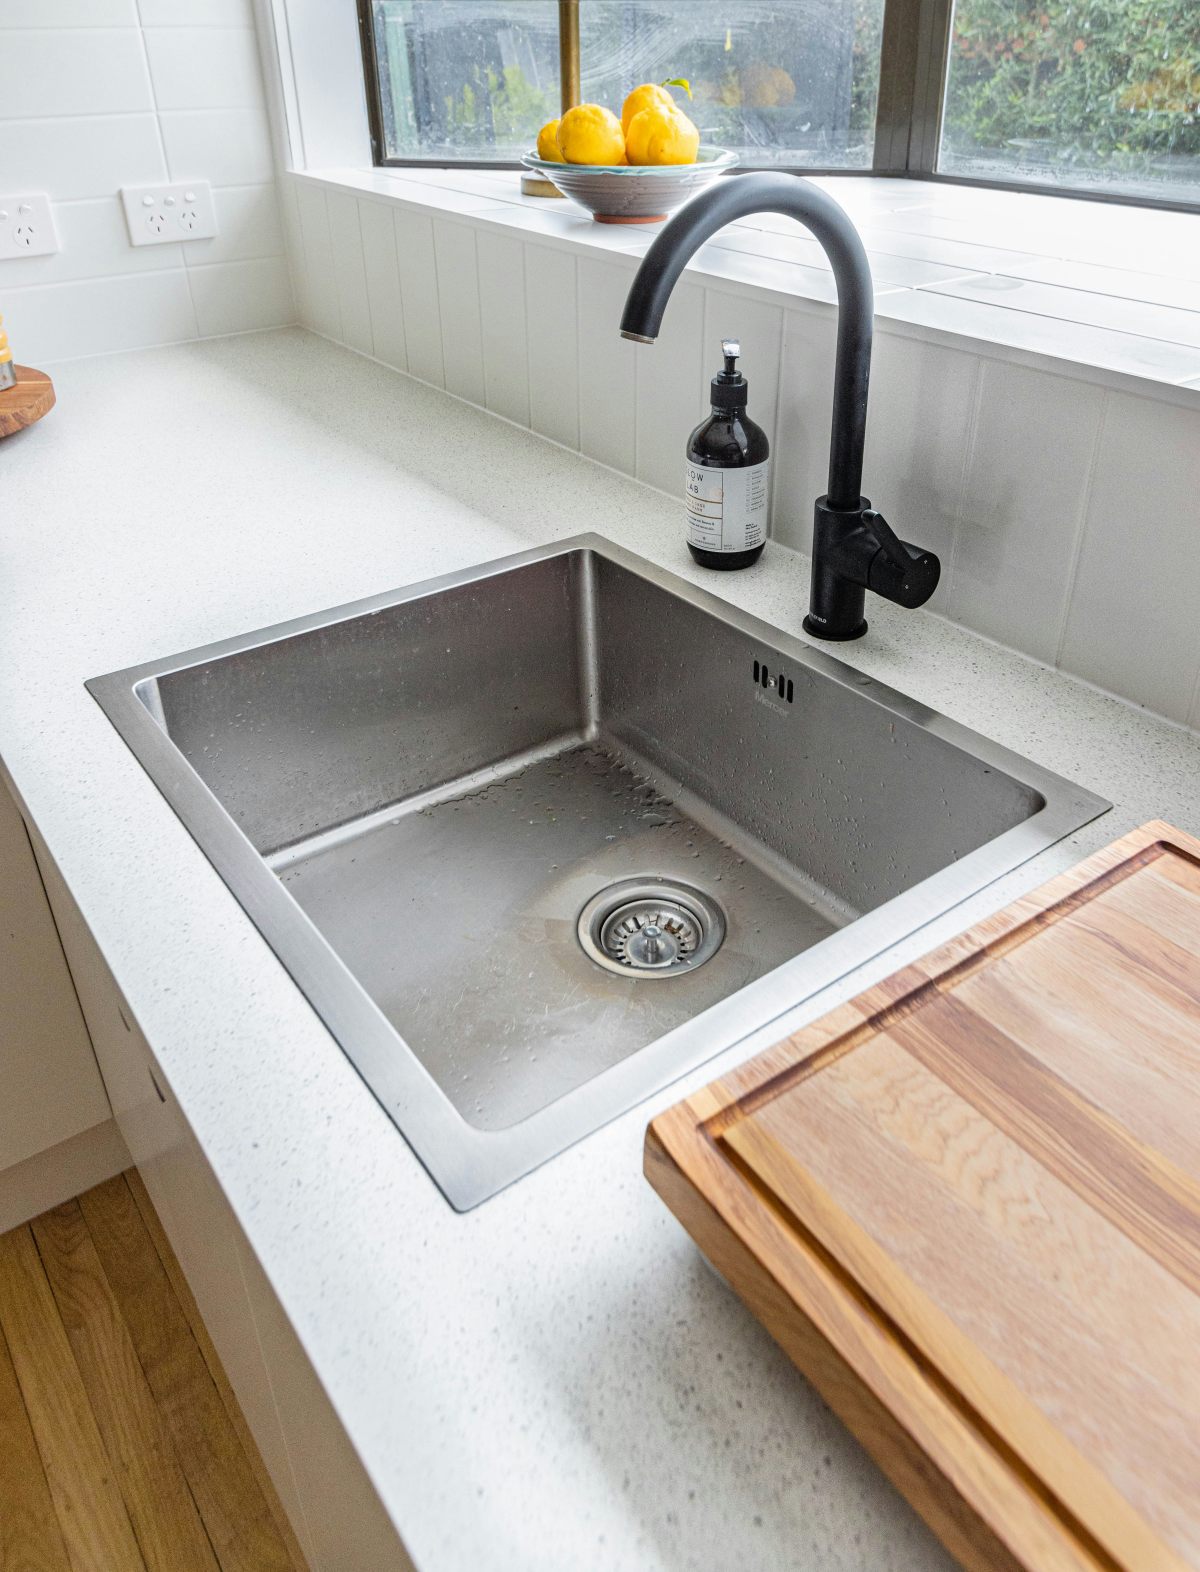 Stainless Steel Sink Cleaner: 7 Simple Recipes